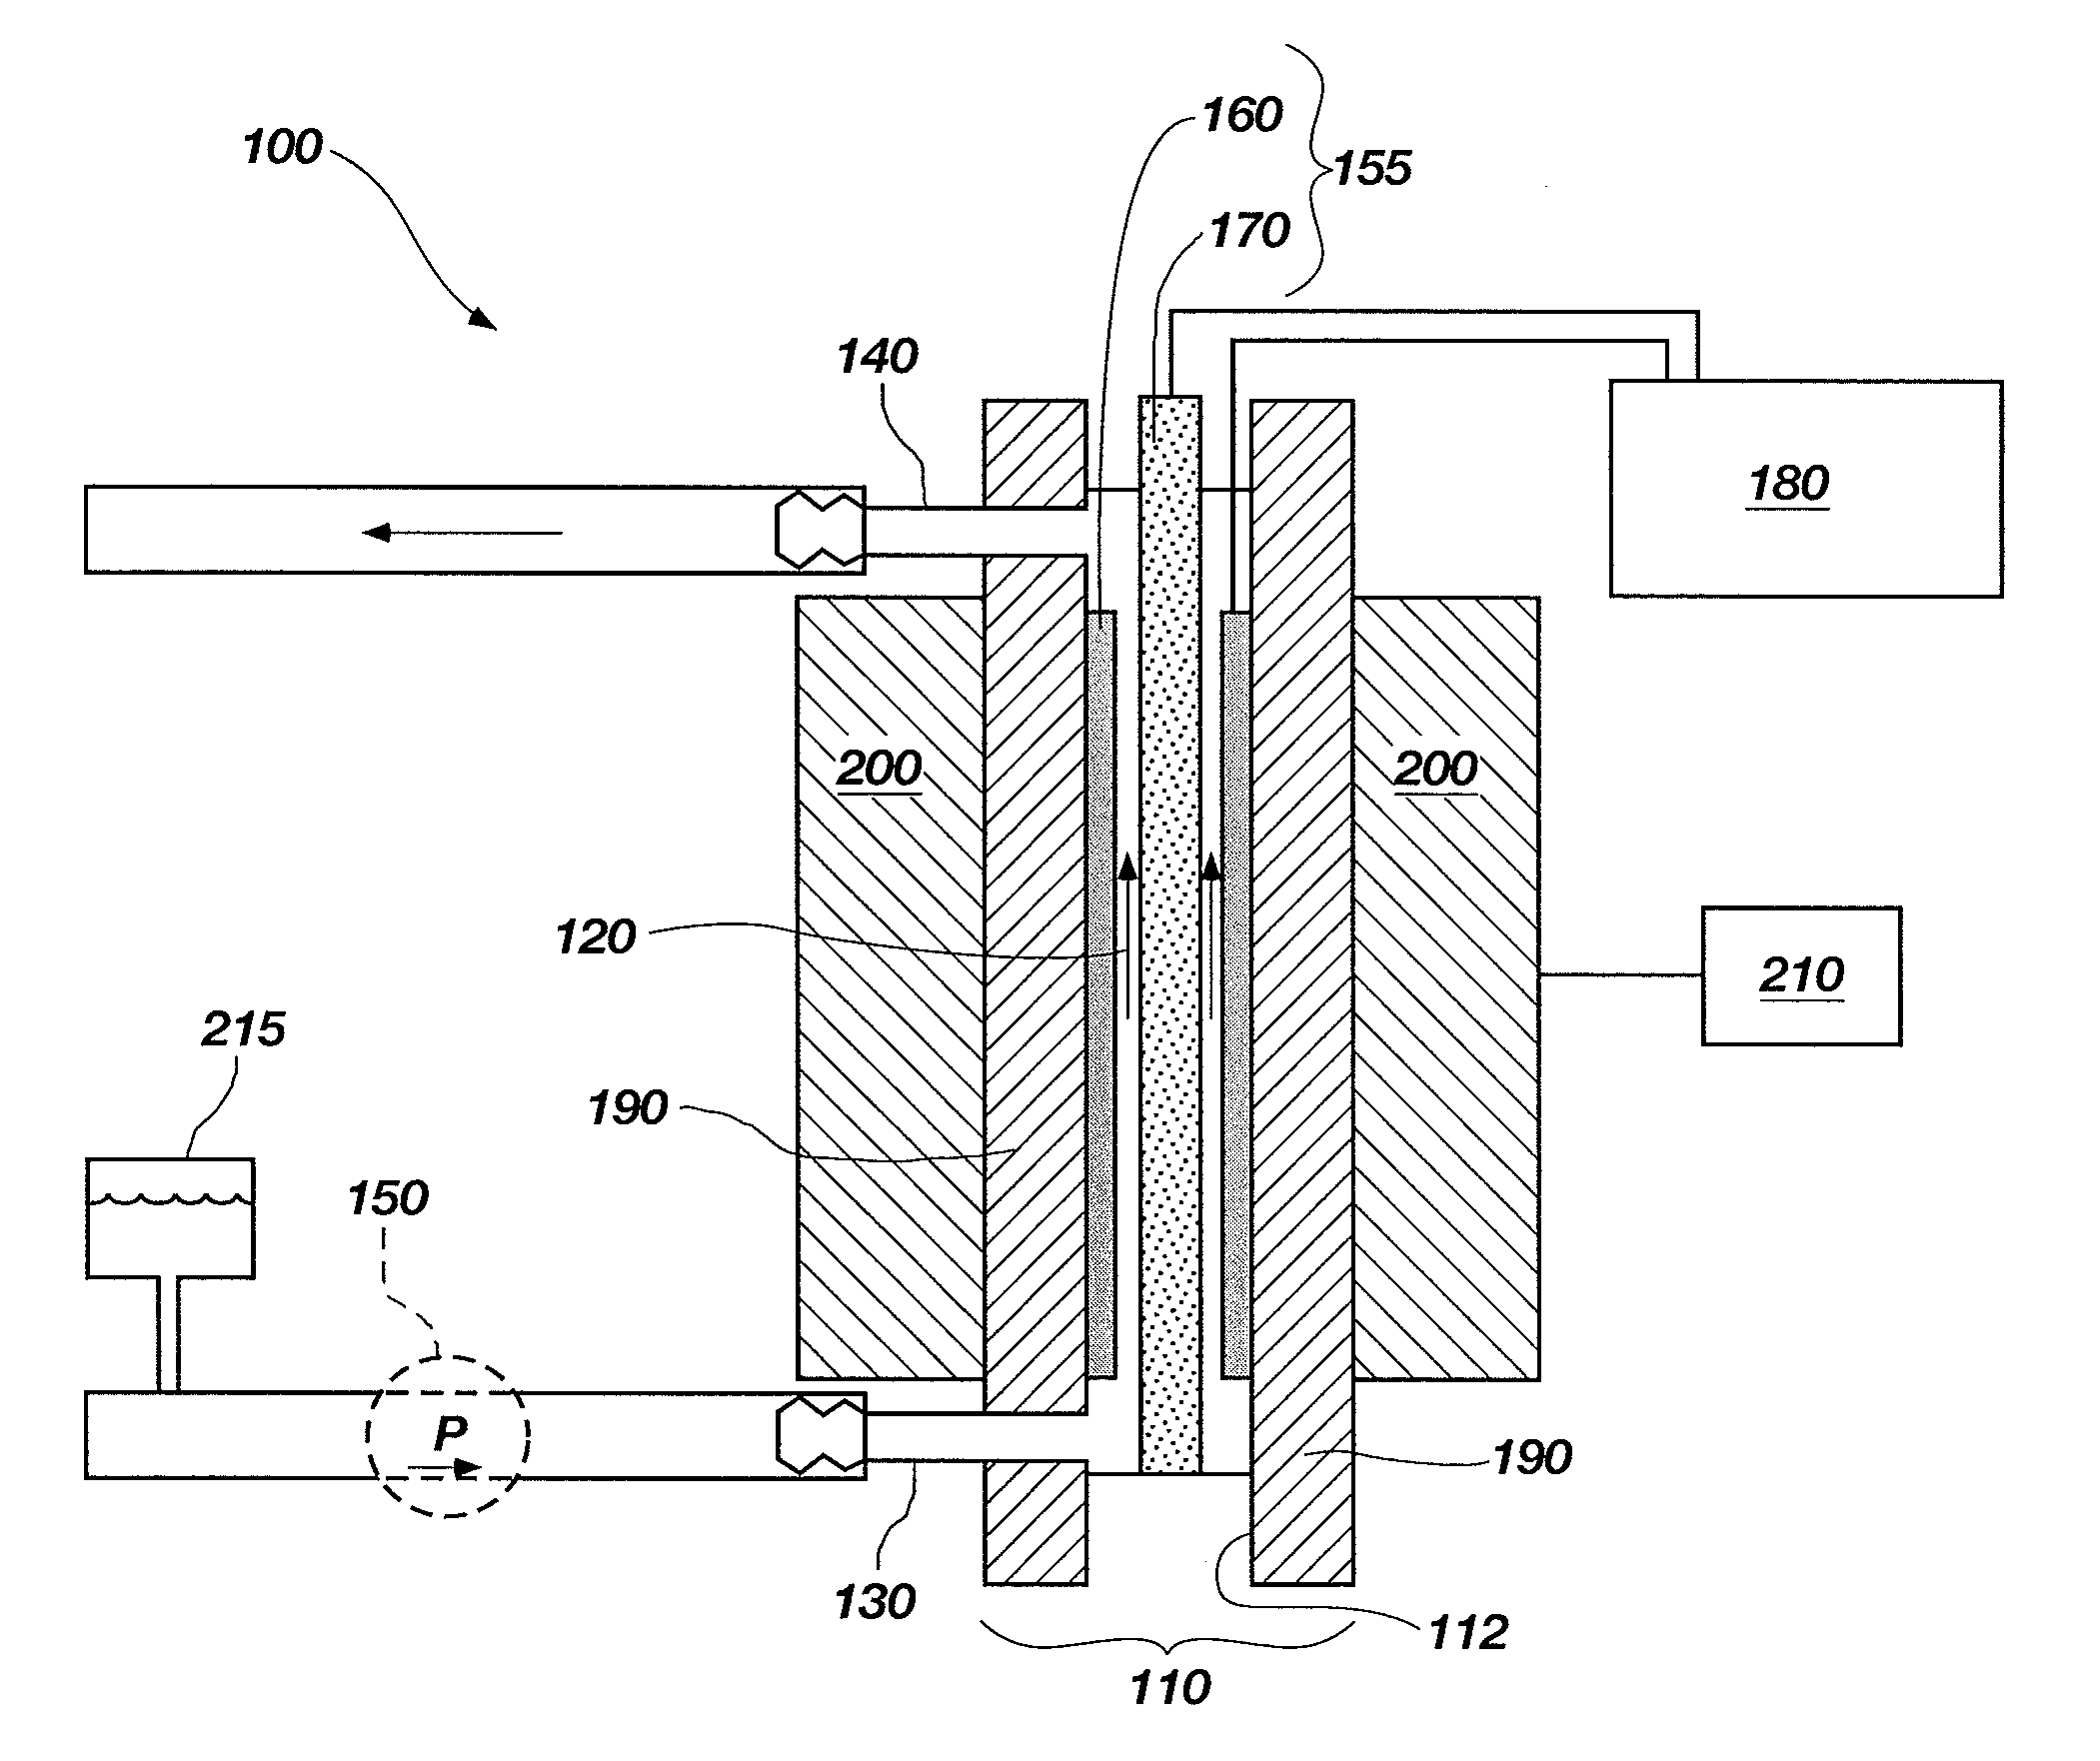 Radionuclide detection devices and associated methods